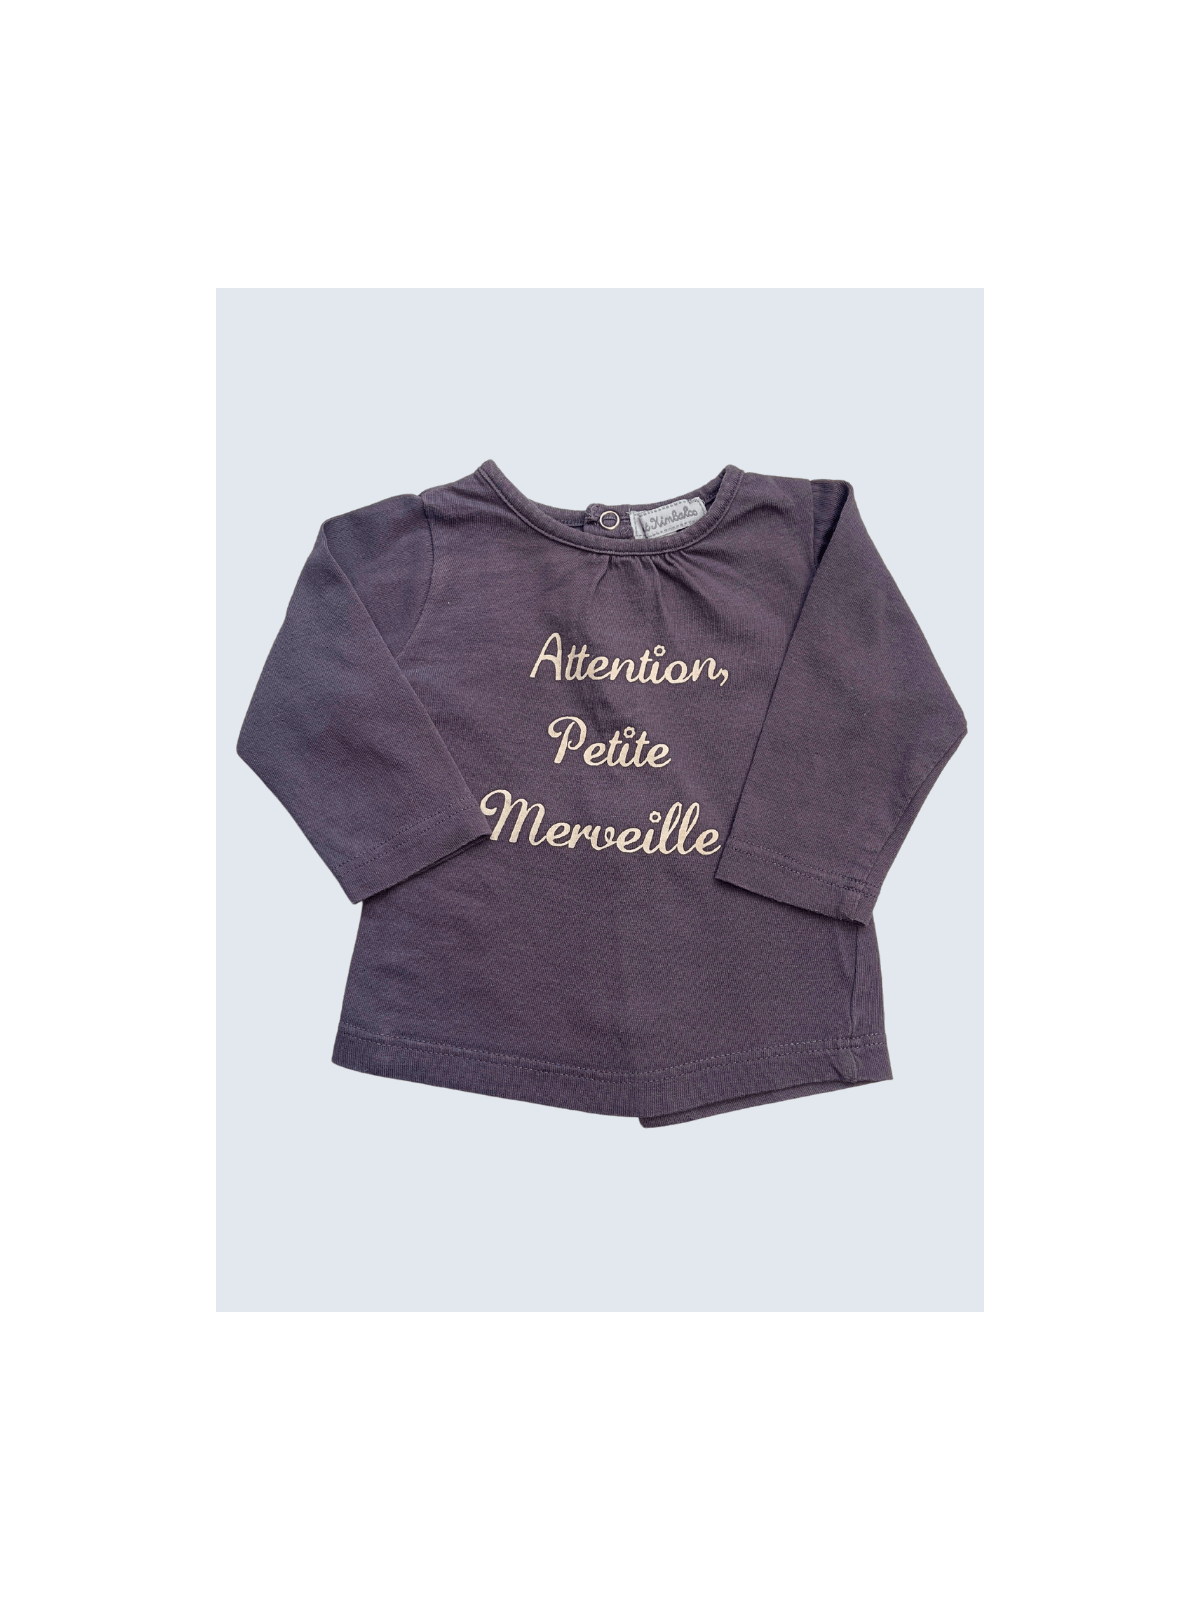 T-Shirt d'occasion Kimbaloo 3 Mois pour fille.